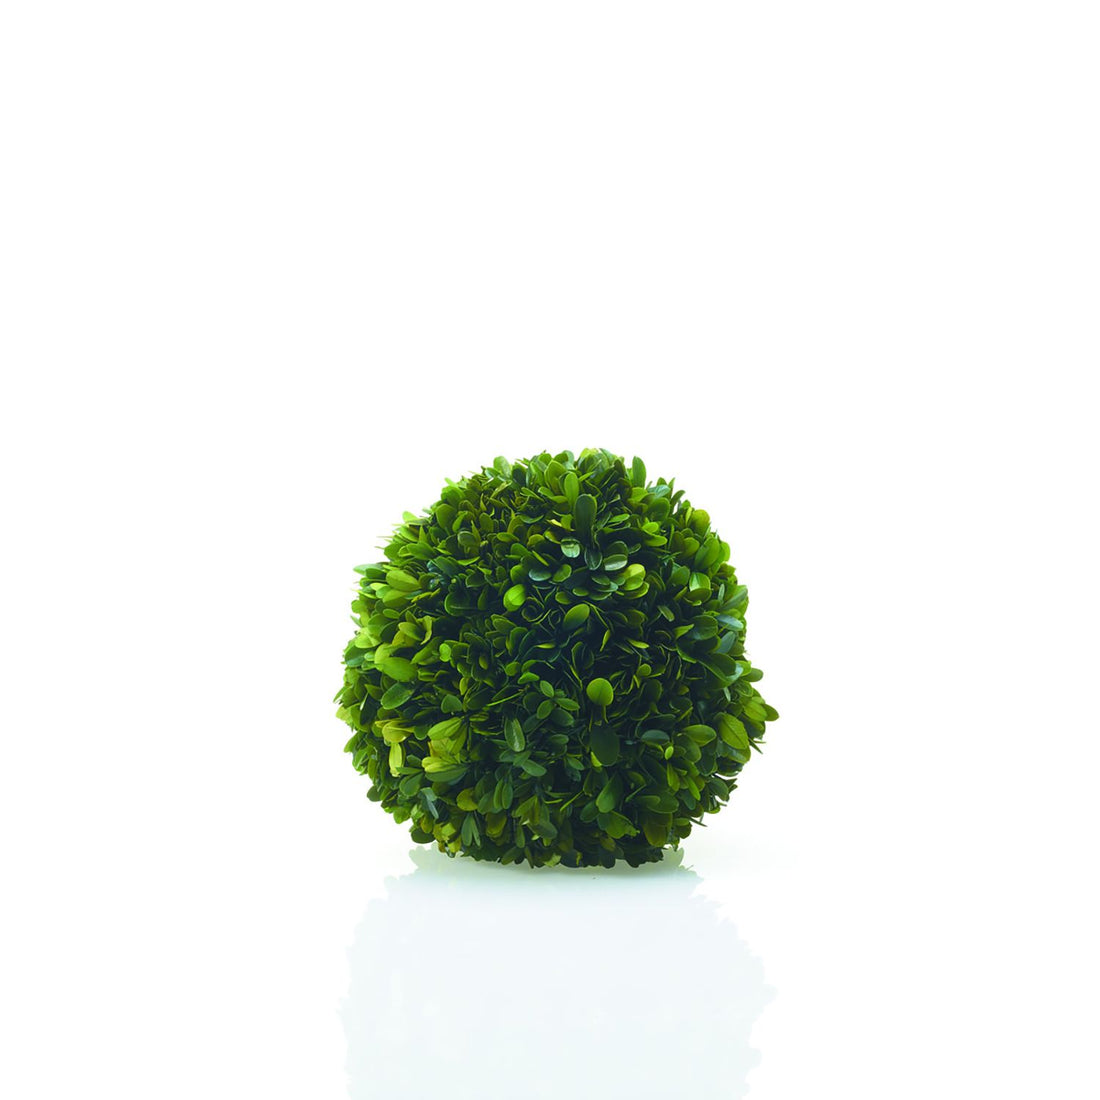 A meticulously crafted Preserved Boxwood Sphere on a serene white background by Accent Decor.